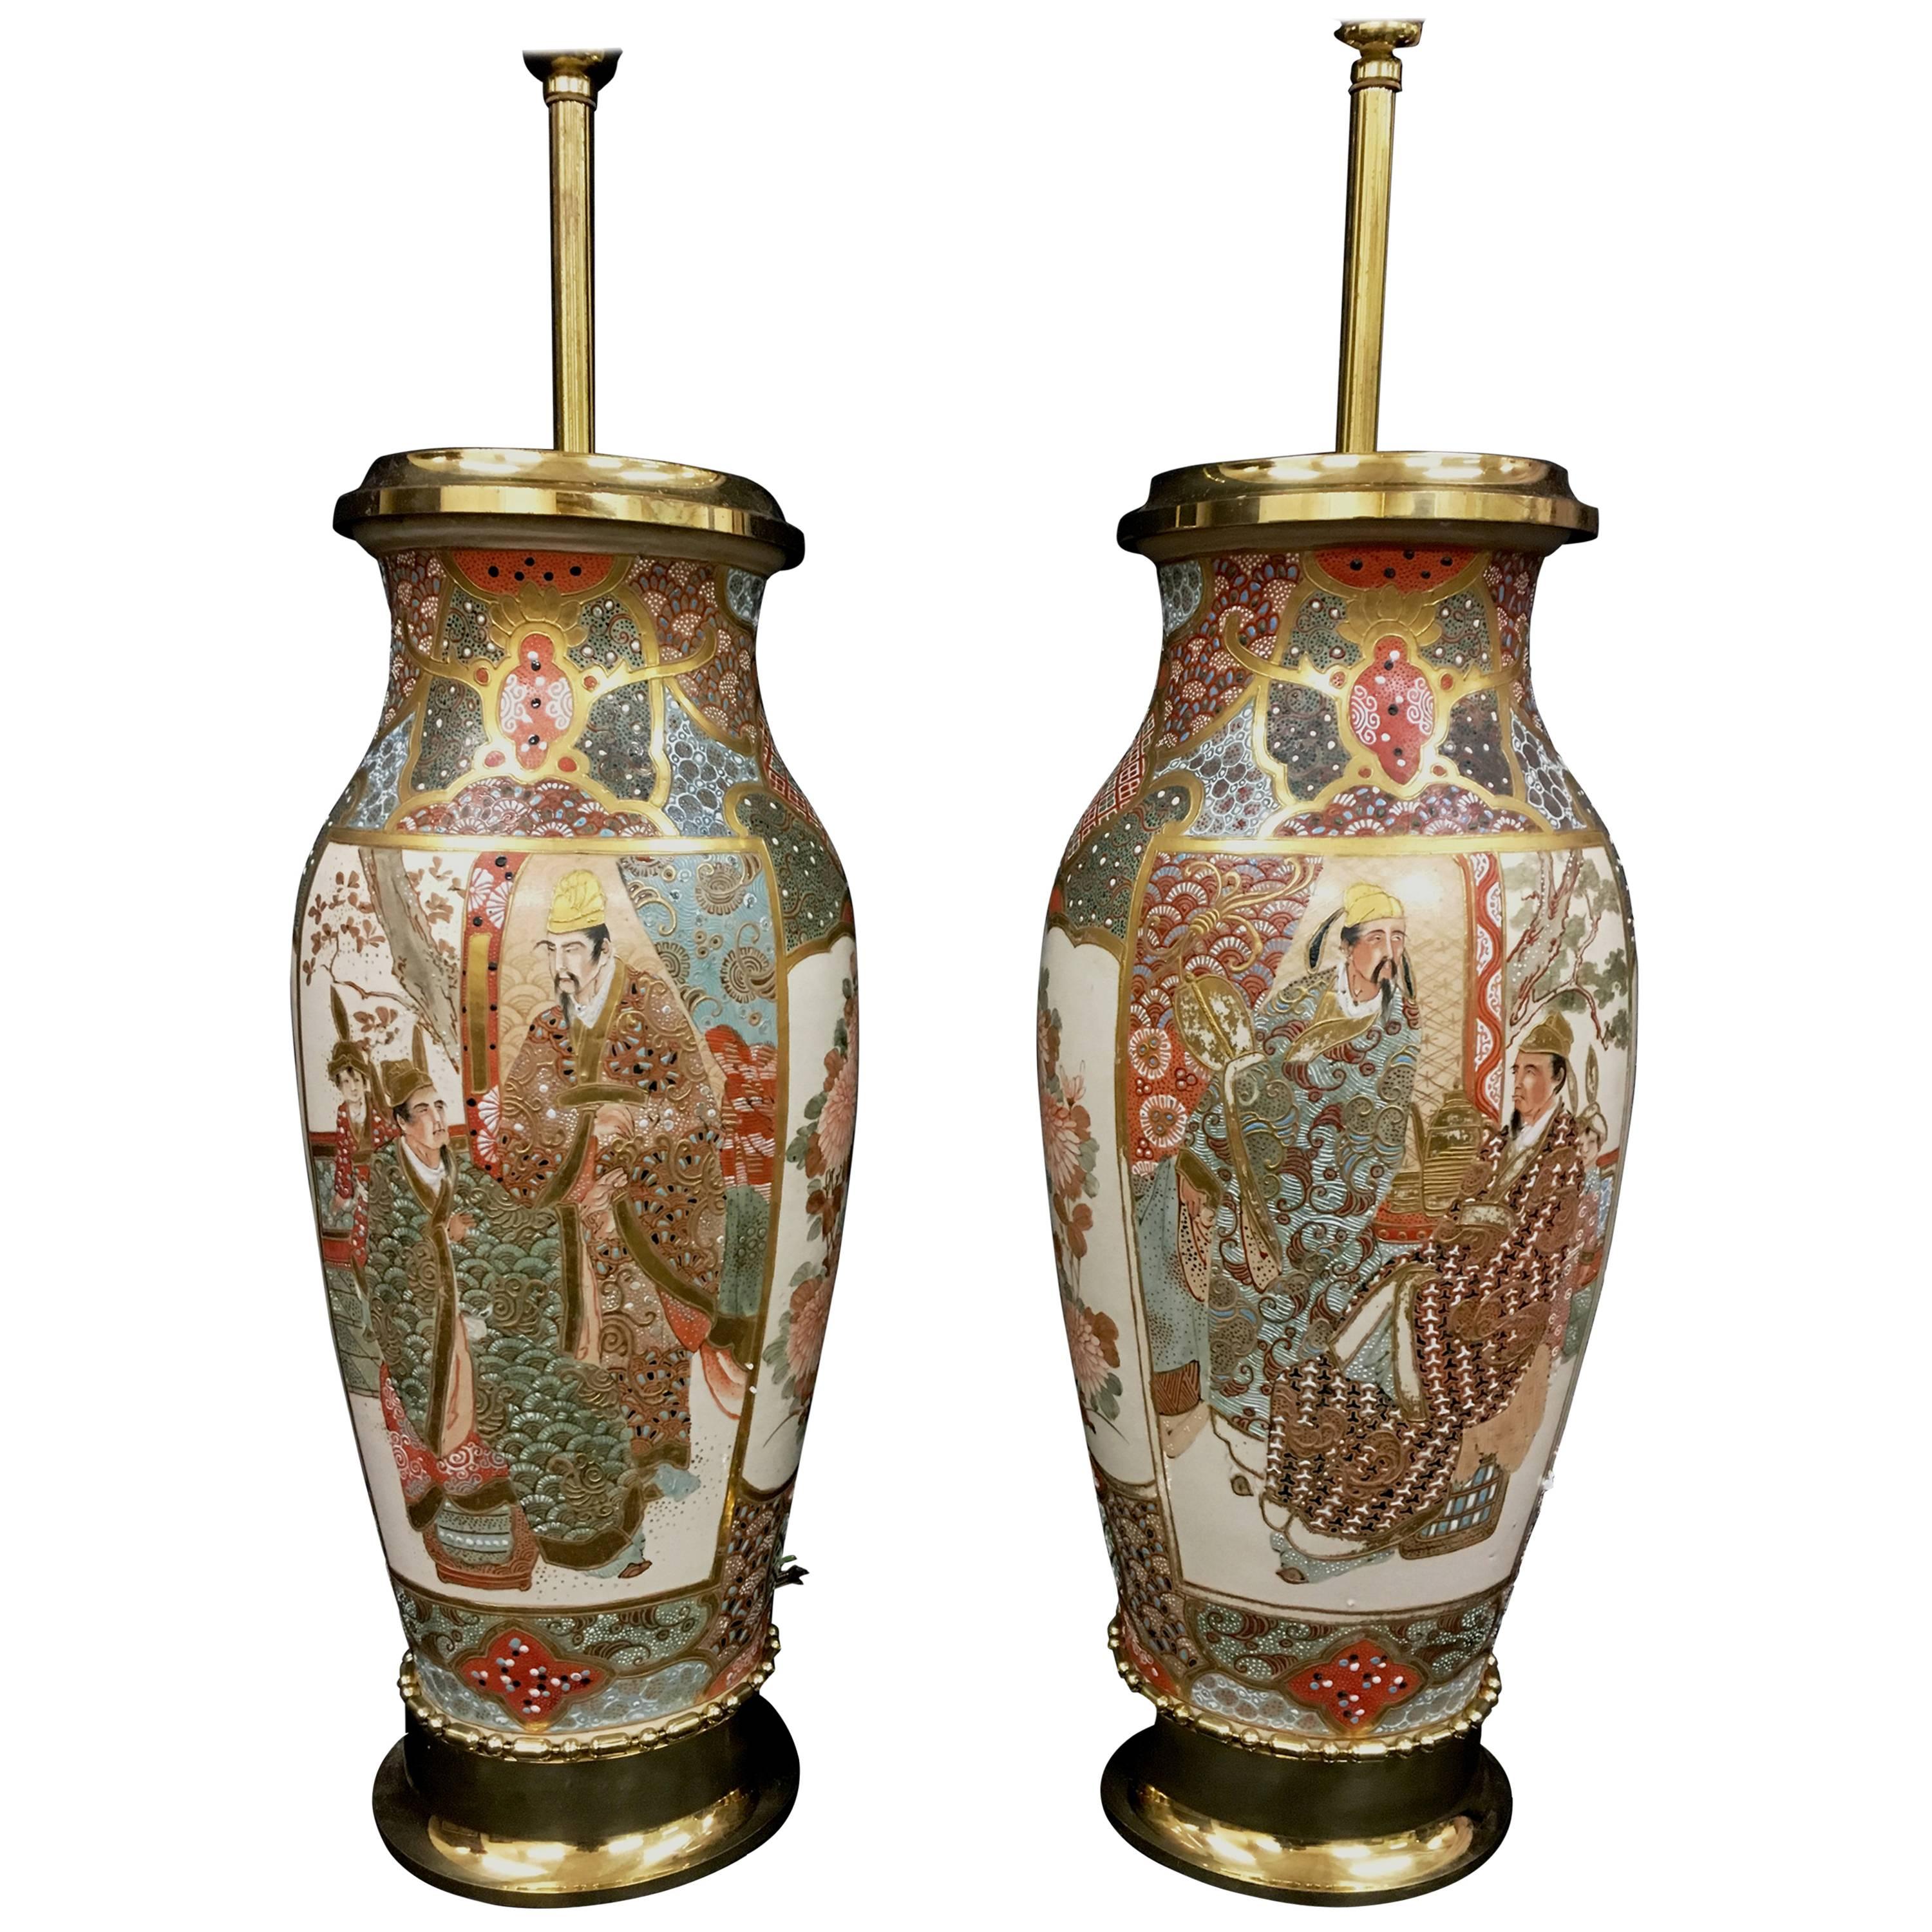 Pair of 19th Century Satsuma Vases or Lamps